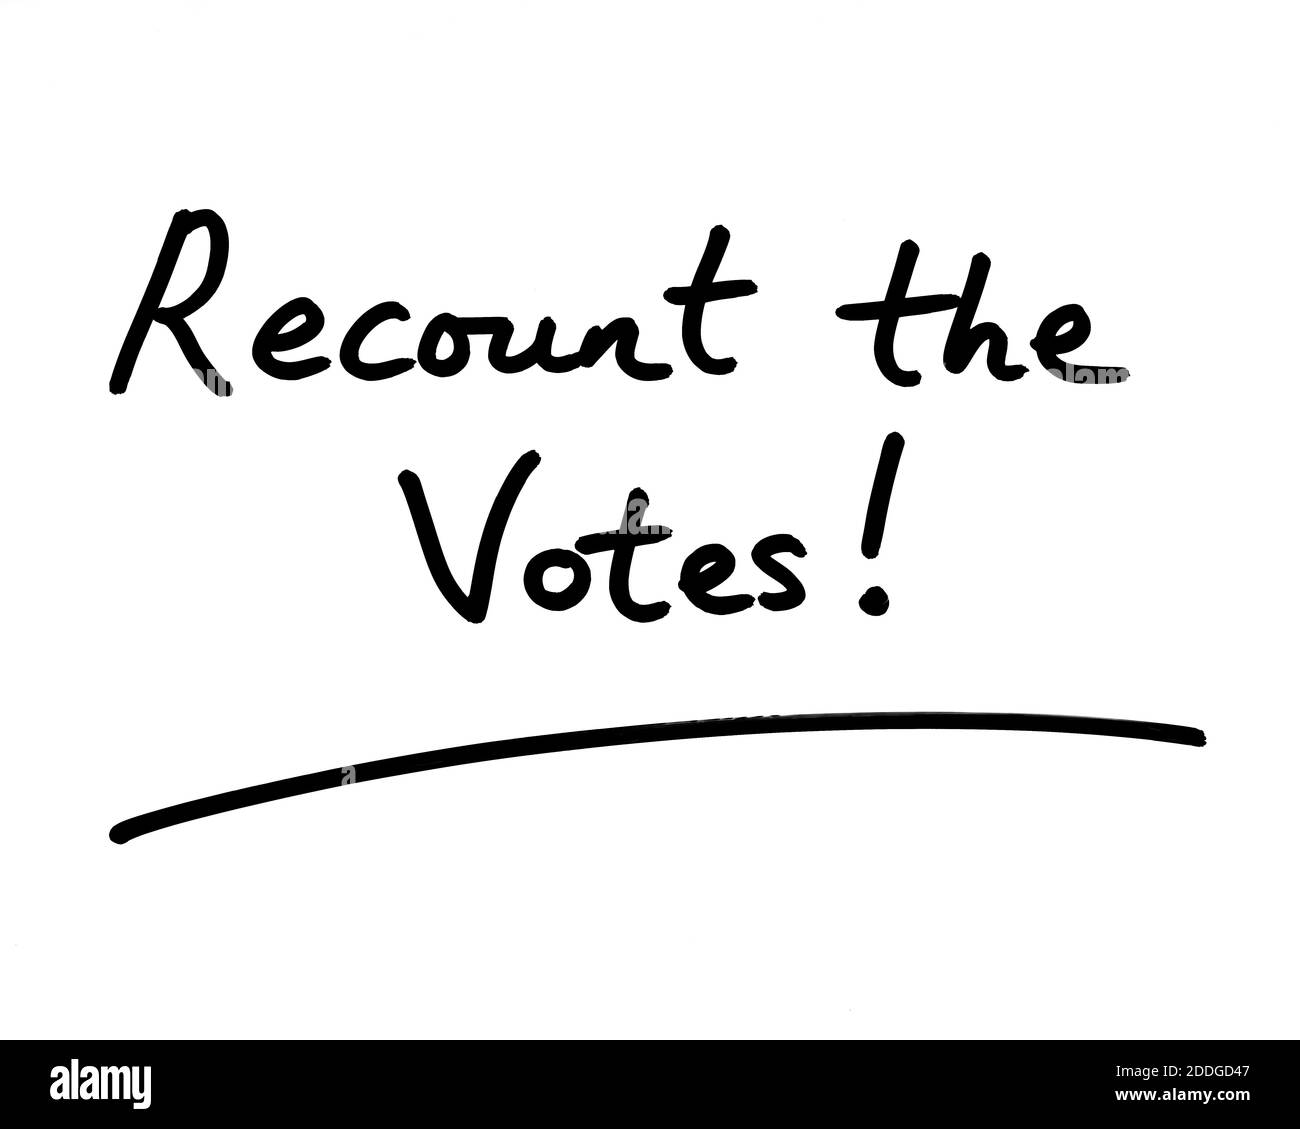 Recount the Votes! handwritten on a white background. Stock Photo